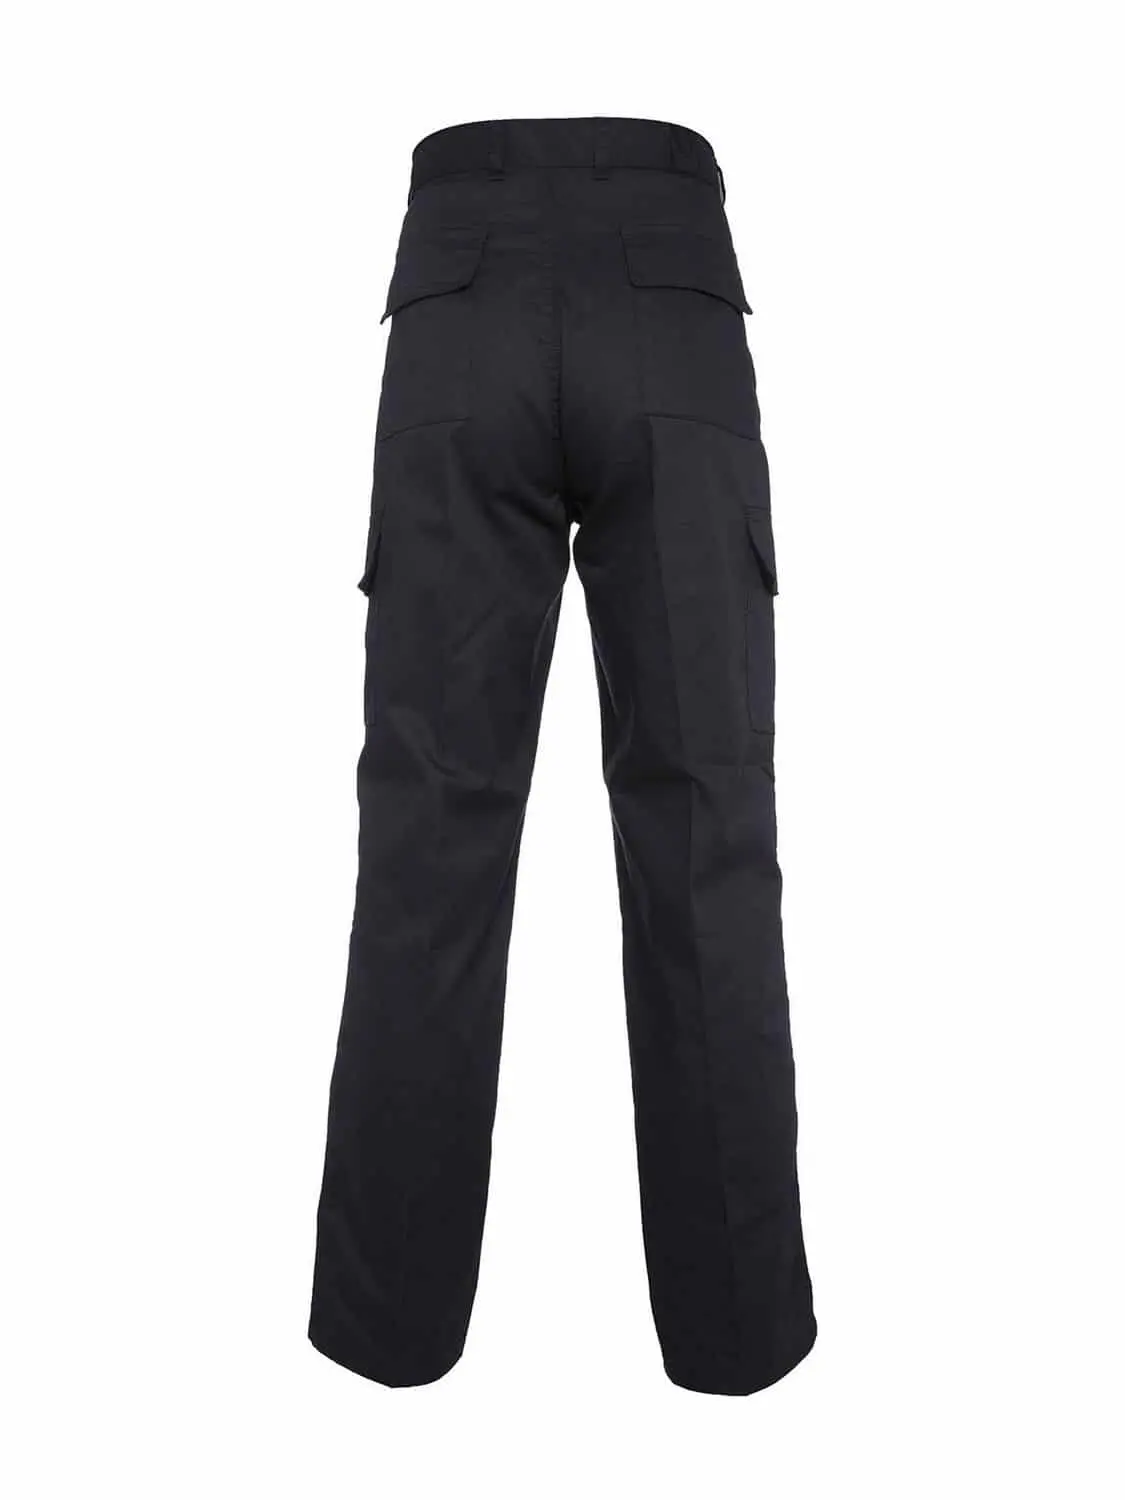 Uneek Cargo Trouser with Knee Pad Pockets - Black, Back